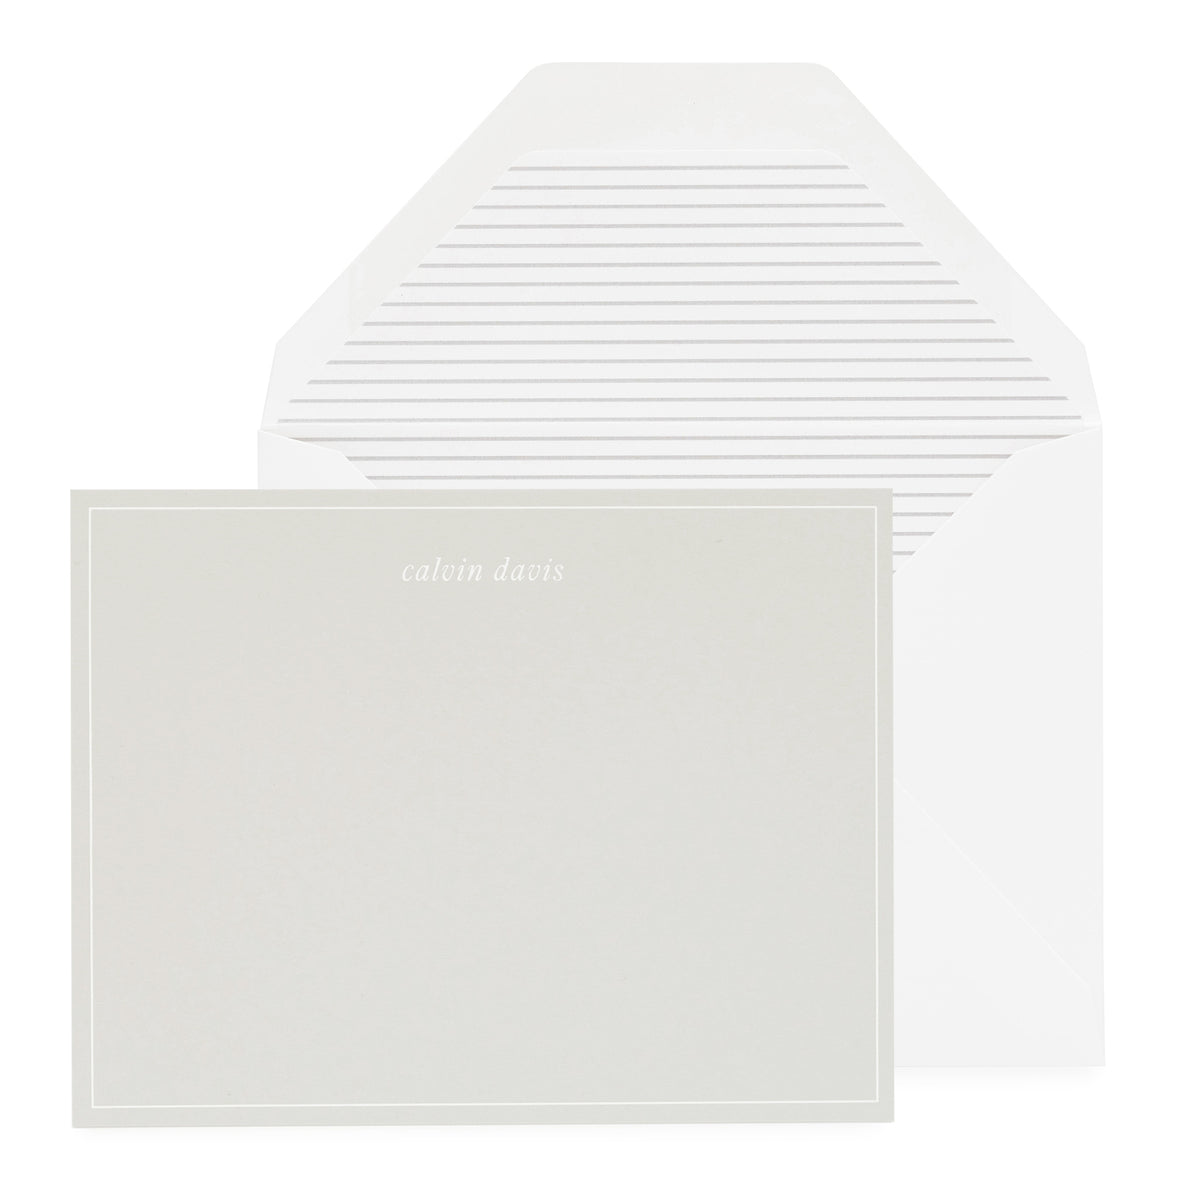 Grey paper personalized stationery with grey striped liner